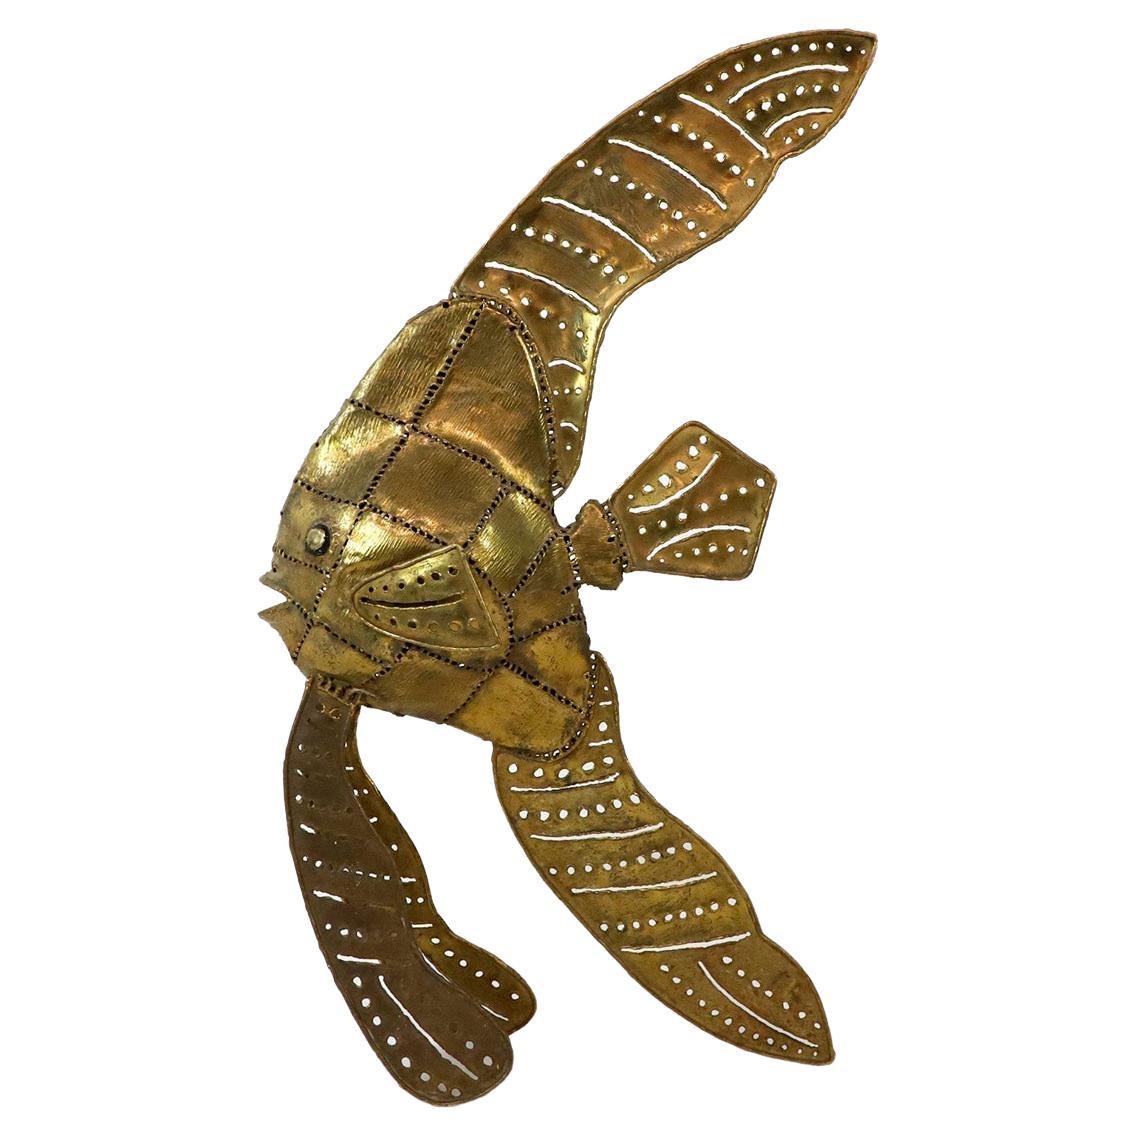 Brutalist Fish sculpture made in Brass. For Sale